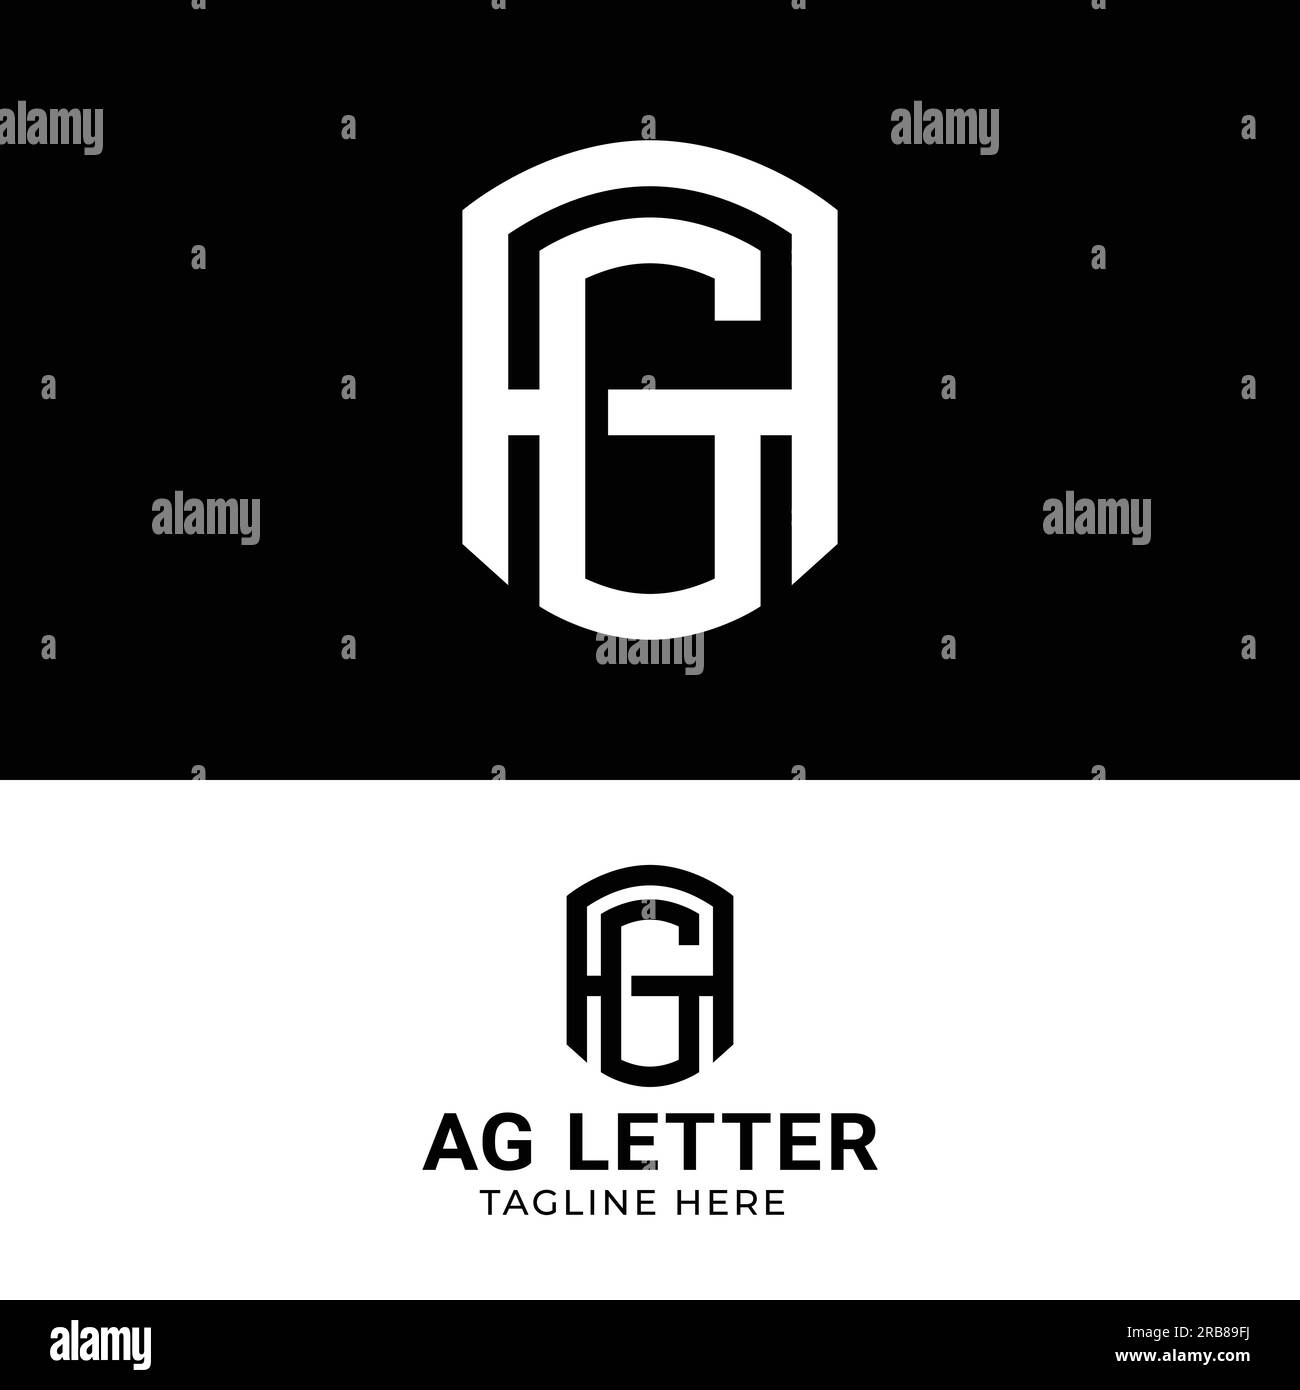 Letter Monogram A G AG GA in Simple Bold Interlock Style for General Fashion Apparel Finance Sports Fitness Logo Design Template Stock Vector